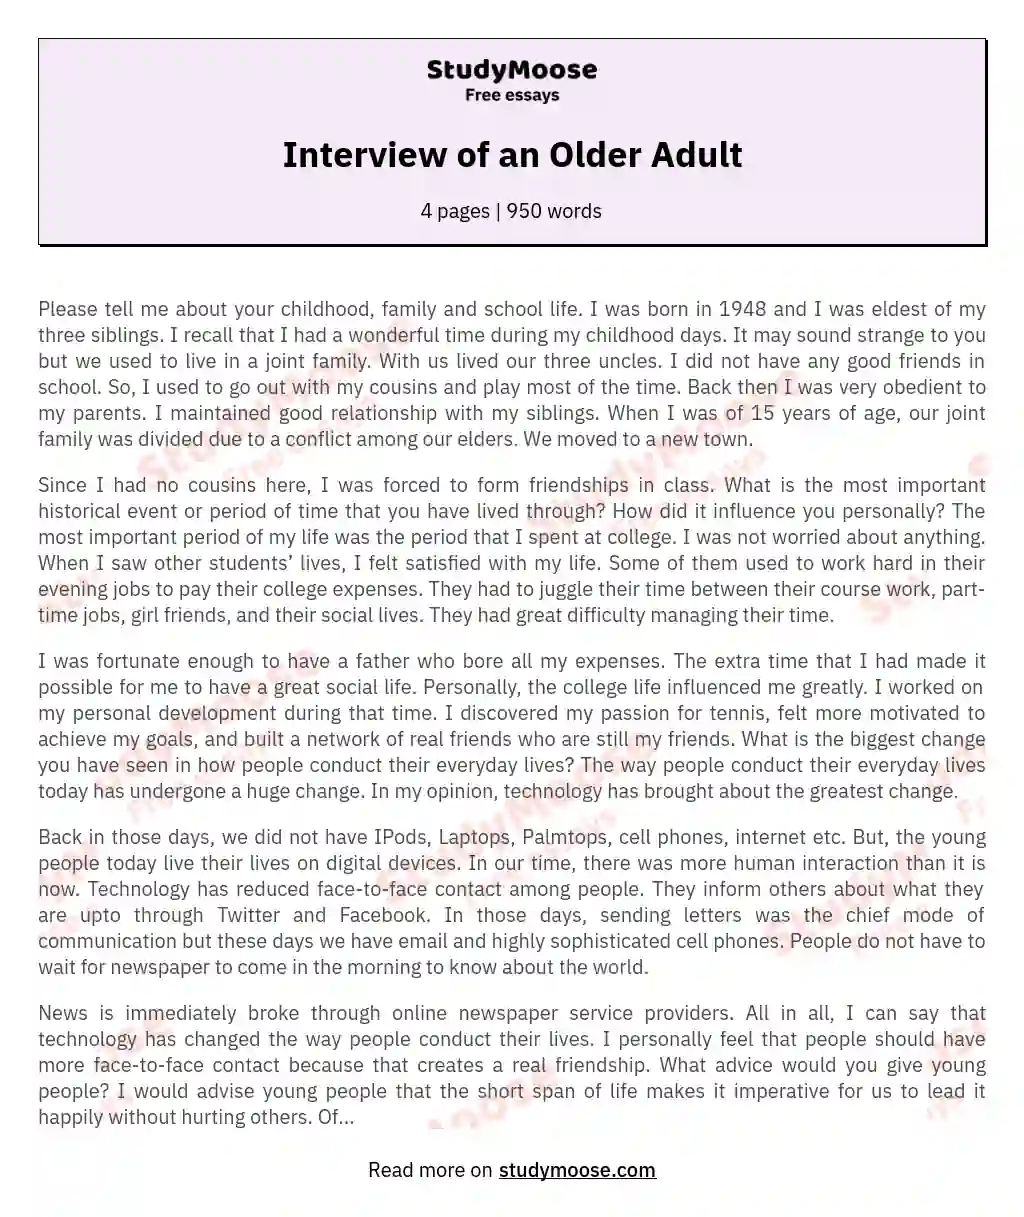 Interview of an Older Adult essay